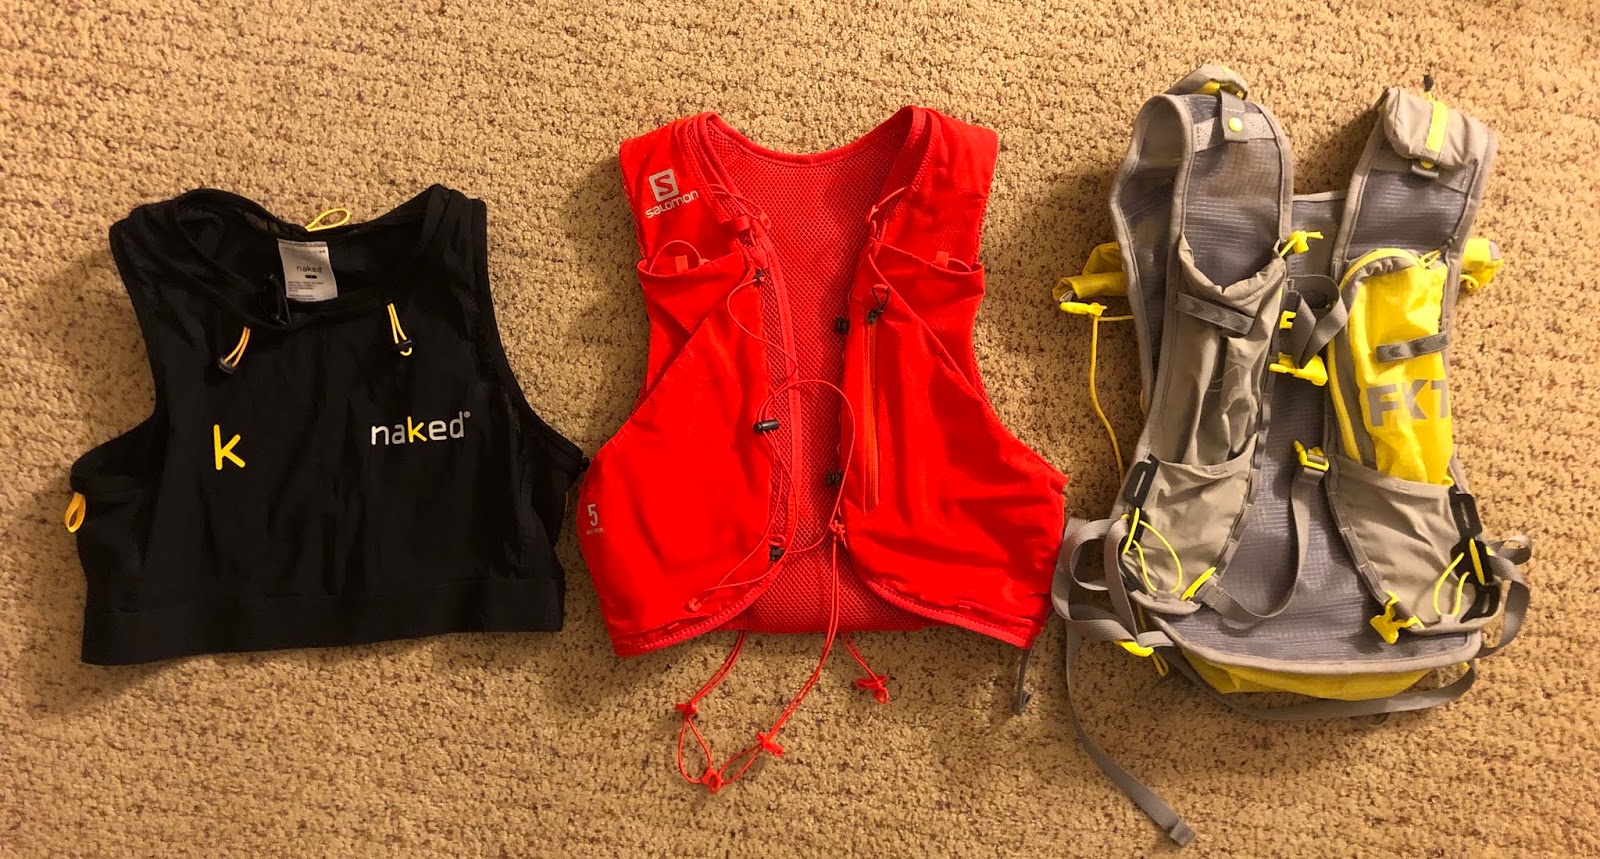 Cherry Antipoison Expectation Road Trail Run: 2019 Running Vest Reviews - From Minimal to Maximal: Naked  Running Vest, Salomon Advanced Skin 5 Set, Ultimate Direction FKT Vest